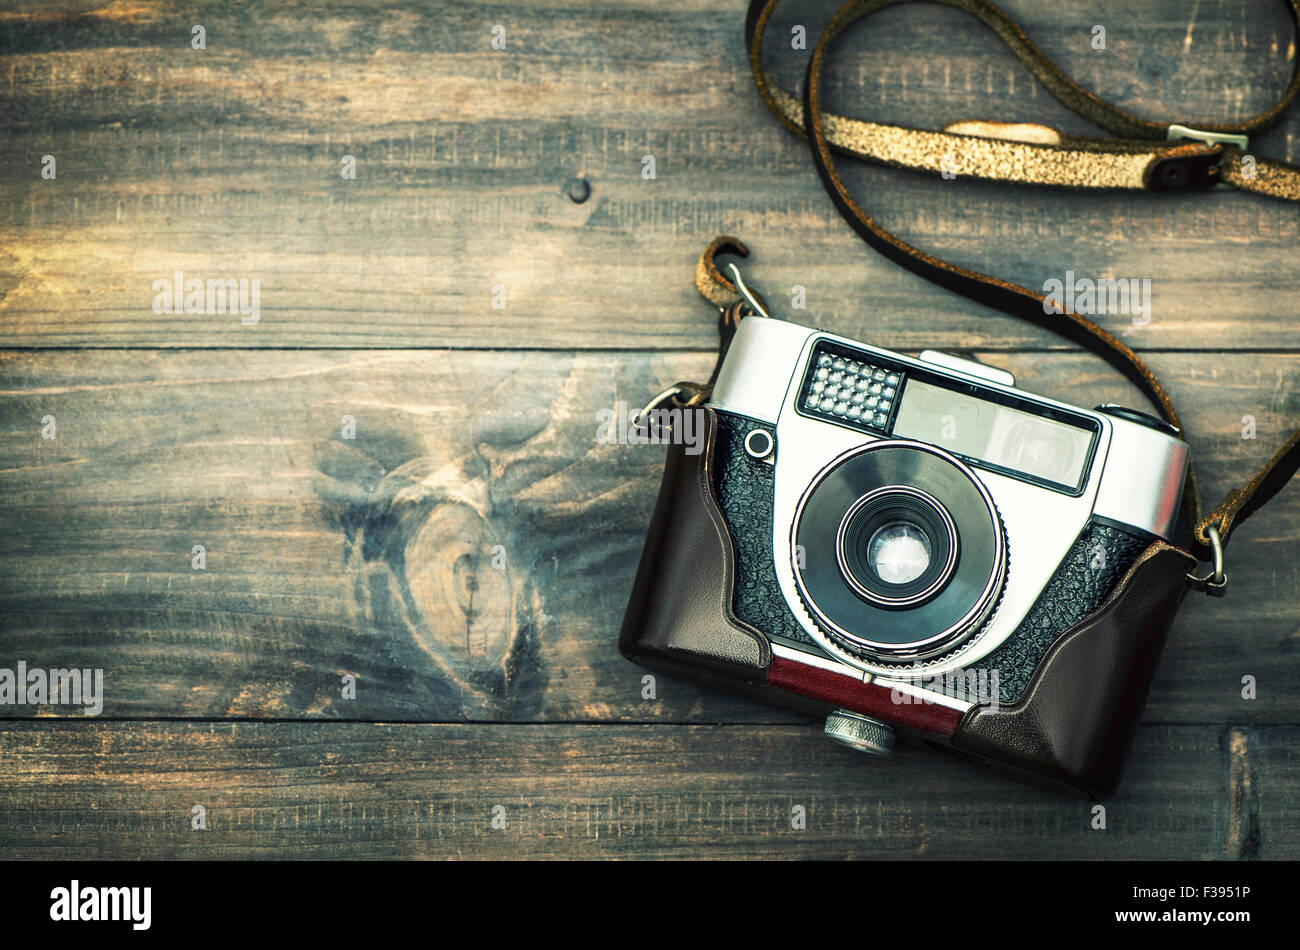 Retro camera on rustic wooden background. Vintage style toned ...